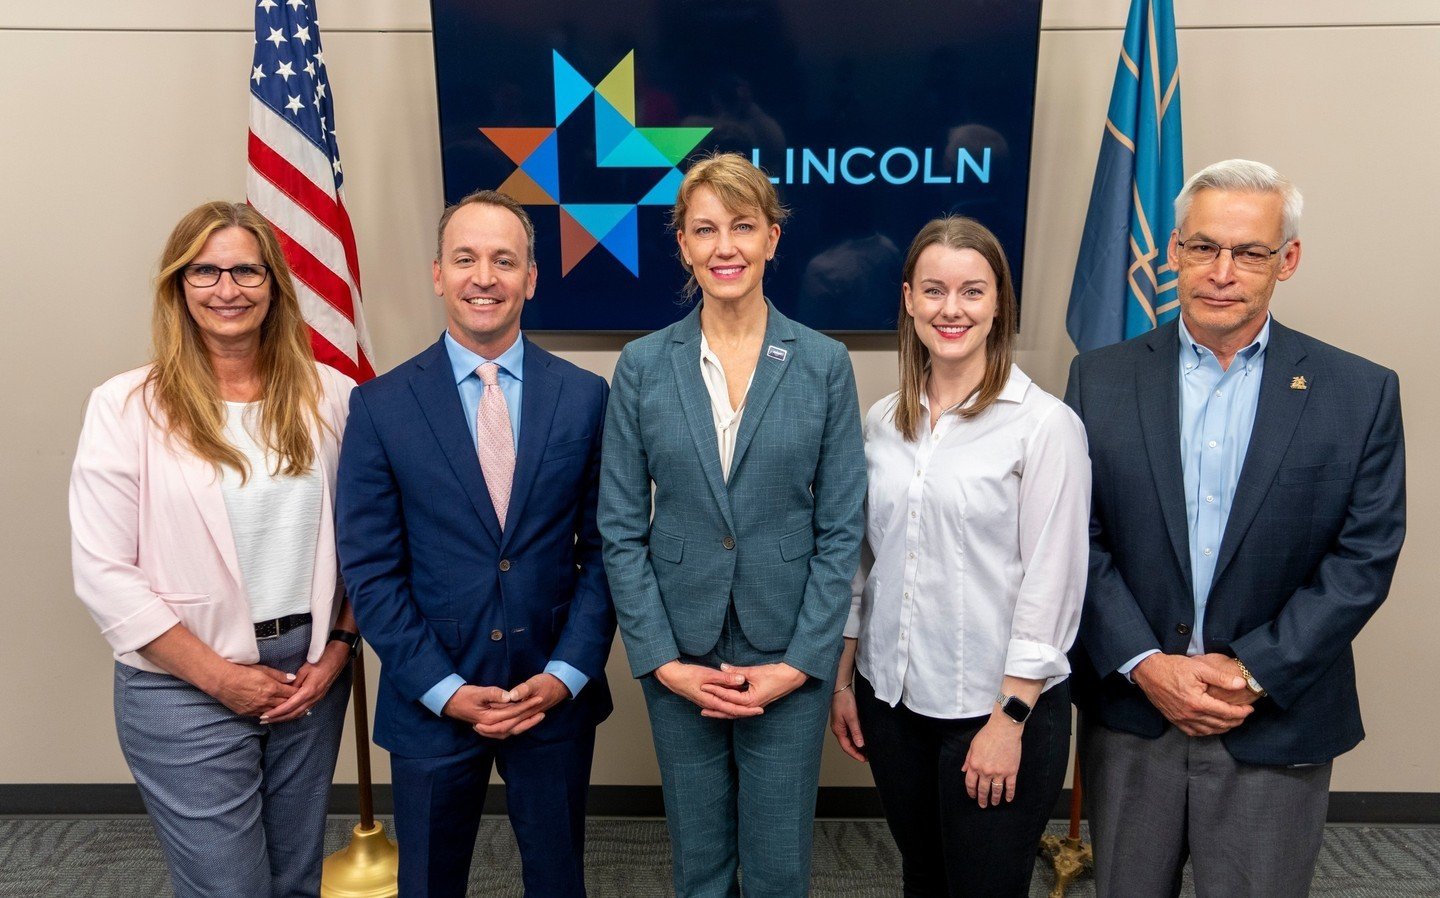 Thank you to the City of Lincoln for a second round of American Rescue Plan funds to address critical workforce needs in the city. 👏 We are proud to represent New American women entrepreneurs and applaud their incredible success through our programs